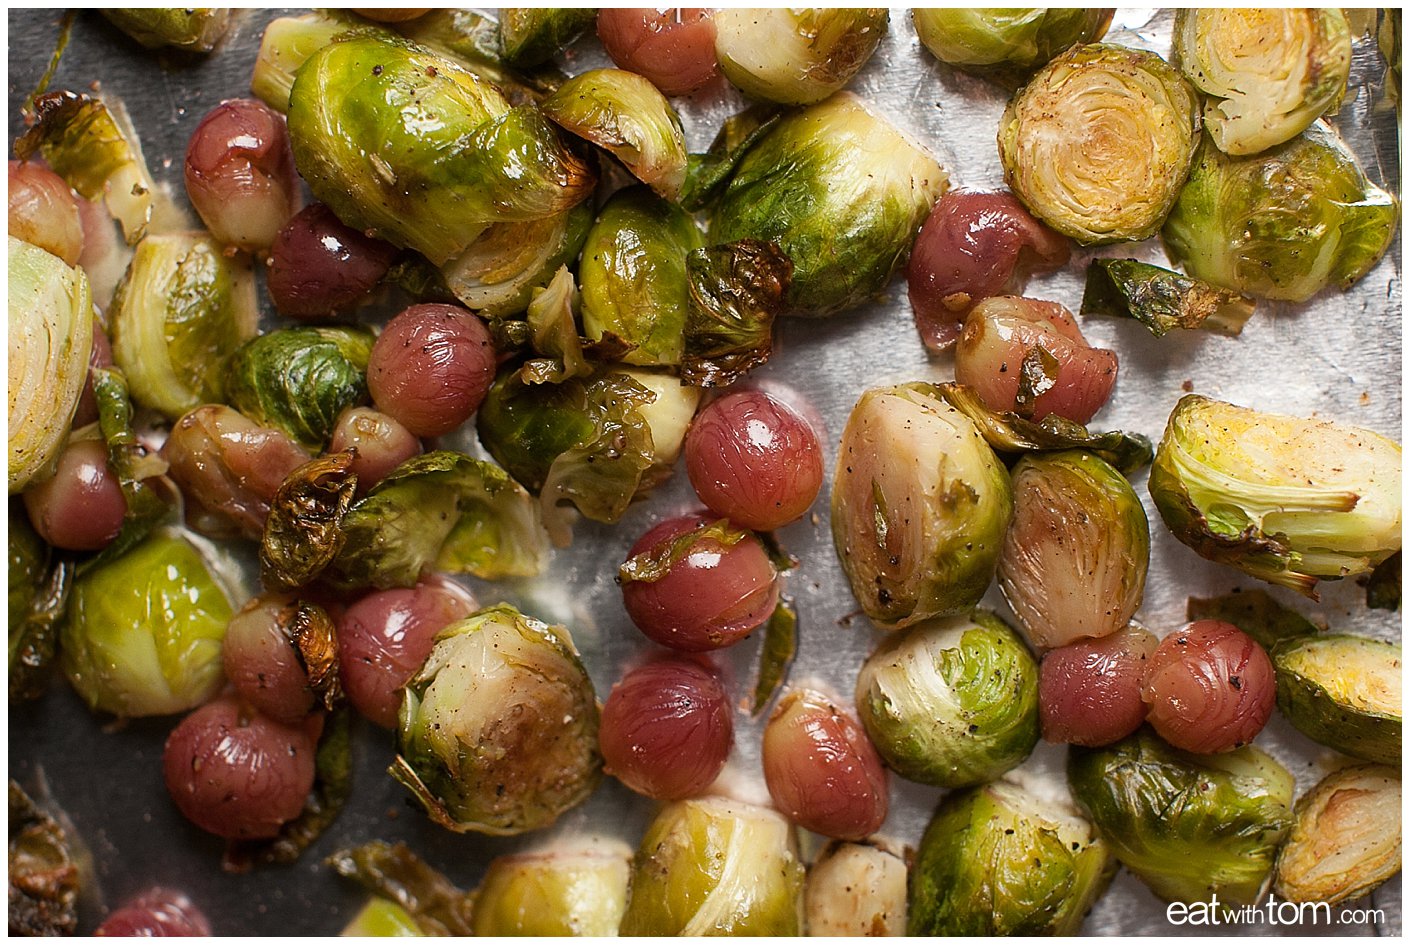 red seedless grapes with brussels sprouts healthy and delicious recipe by eat with tom